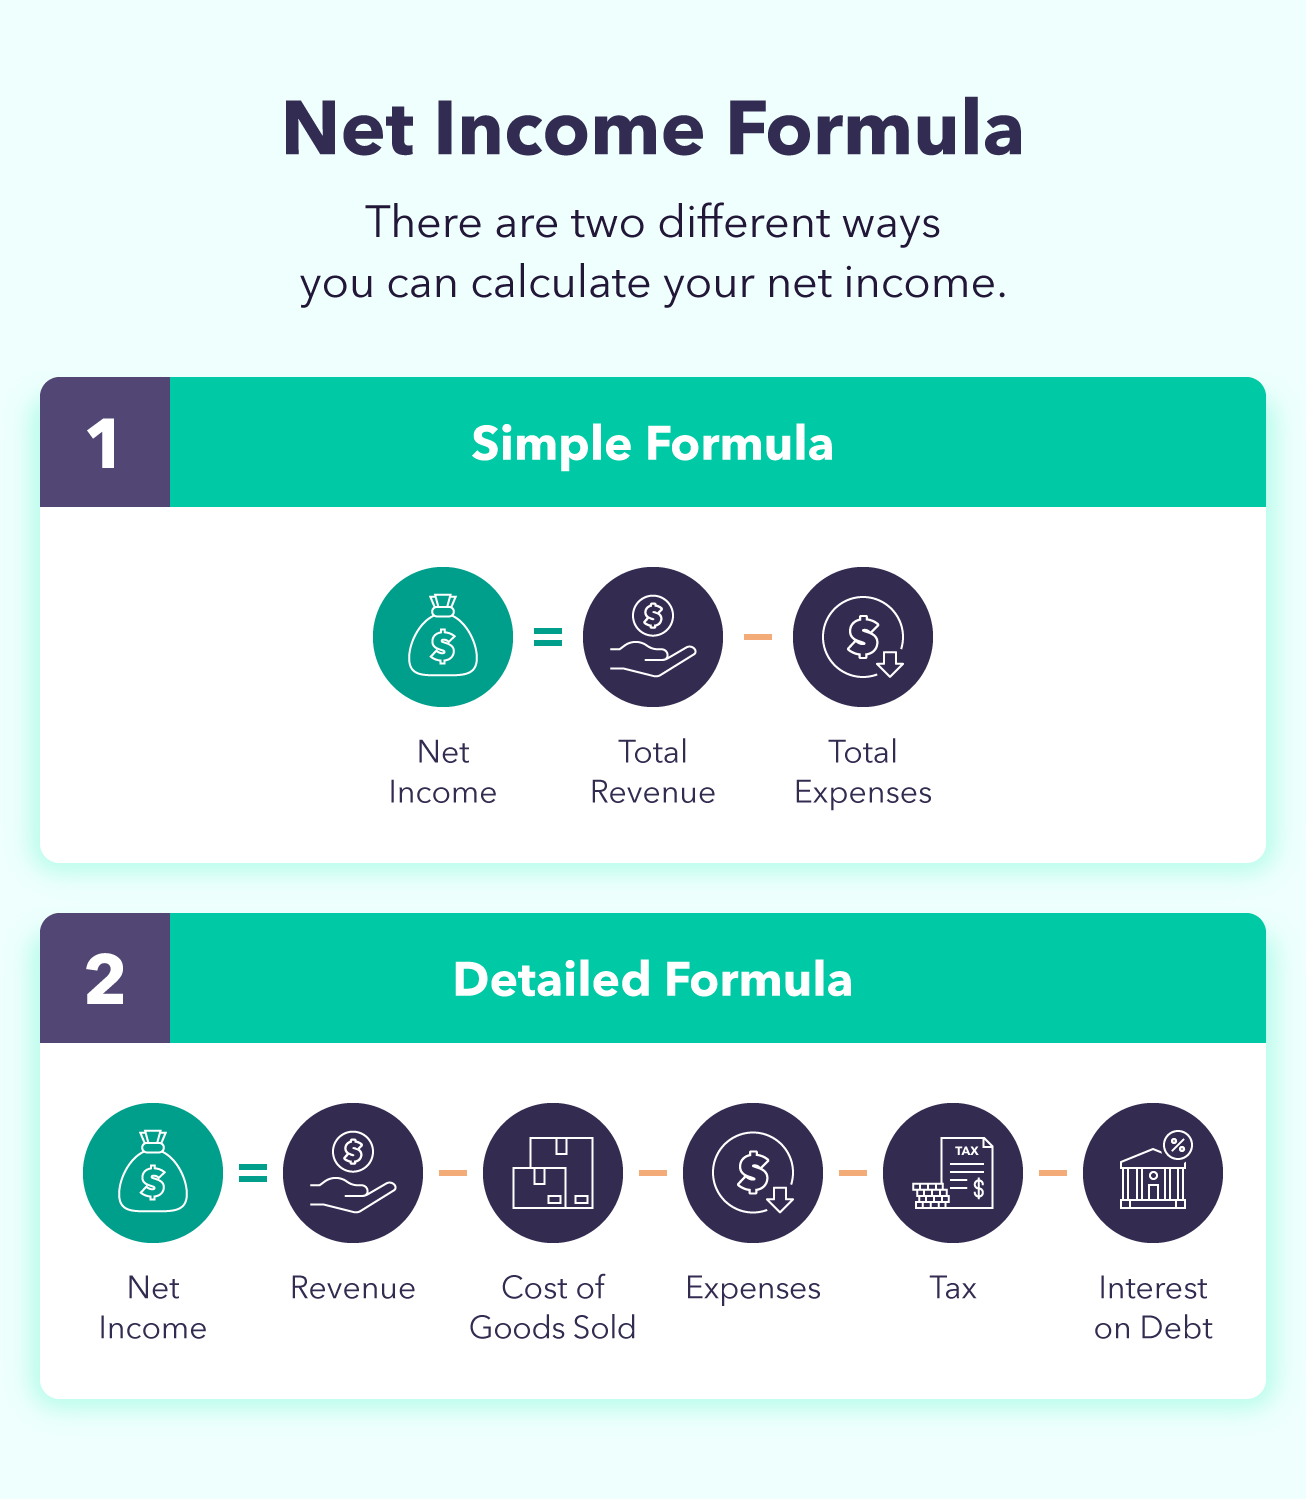 A graphic showcases two different versions of the net income formula.